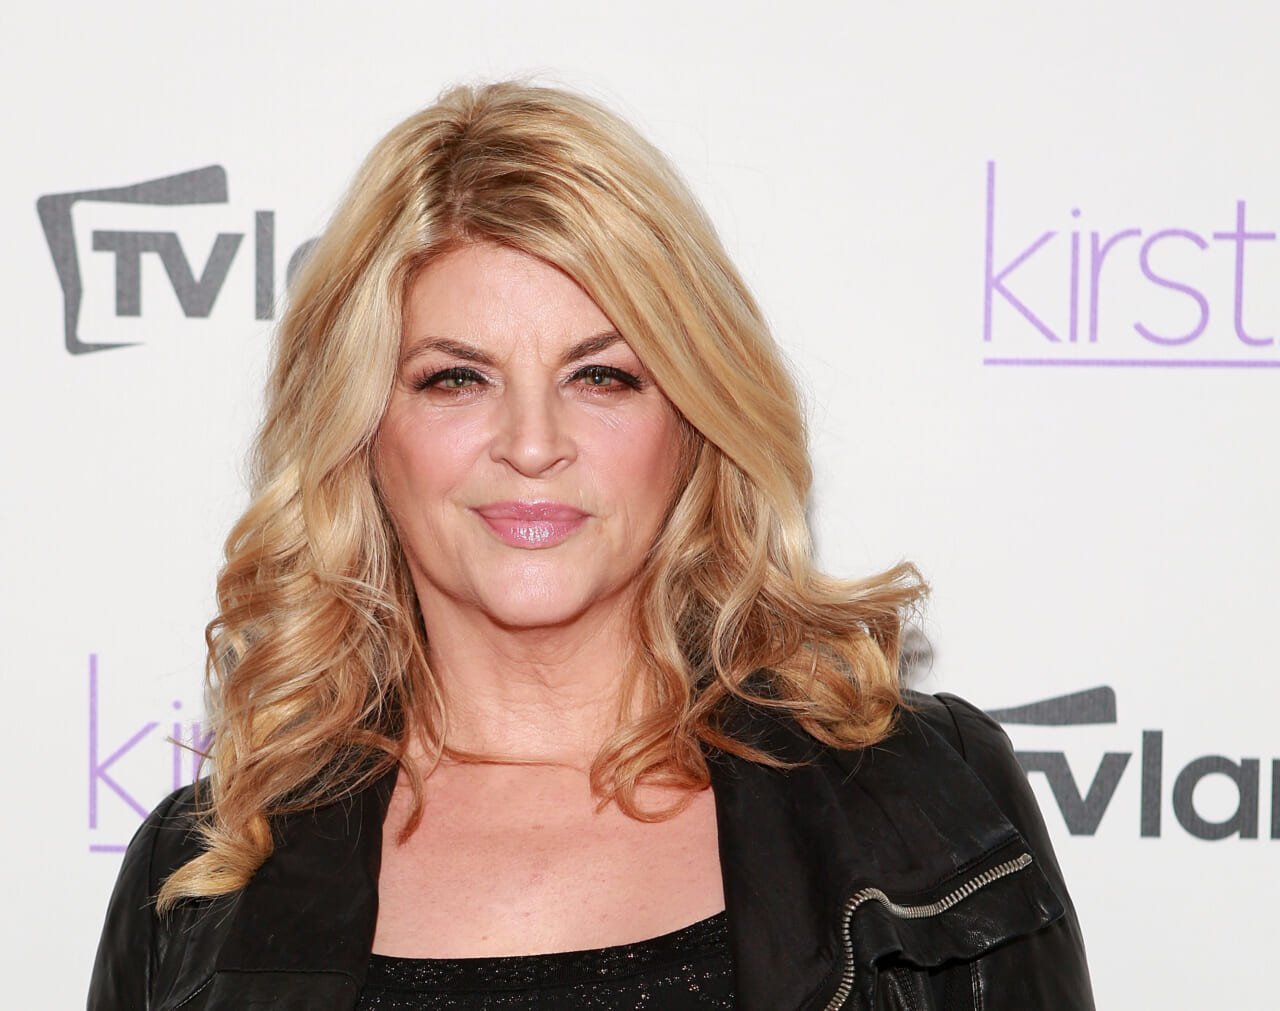 Kirstie Alley doubles down on Trump support, says she's voting for him because he's 'not a politician'